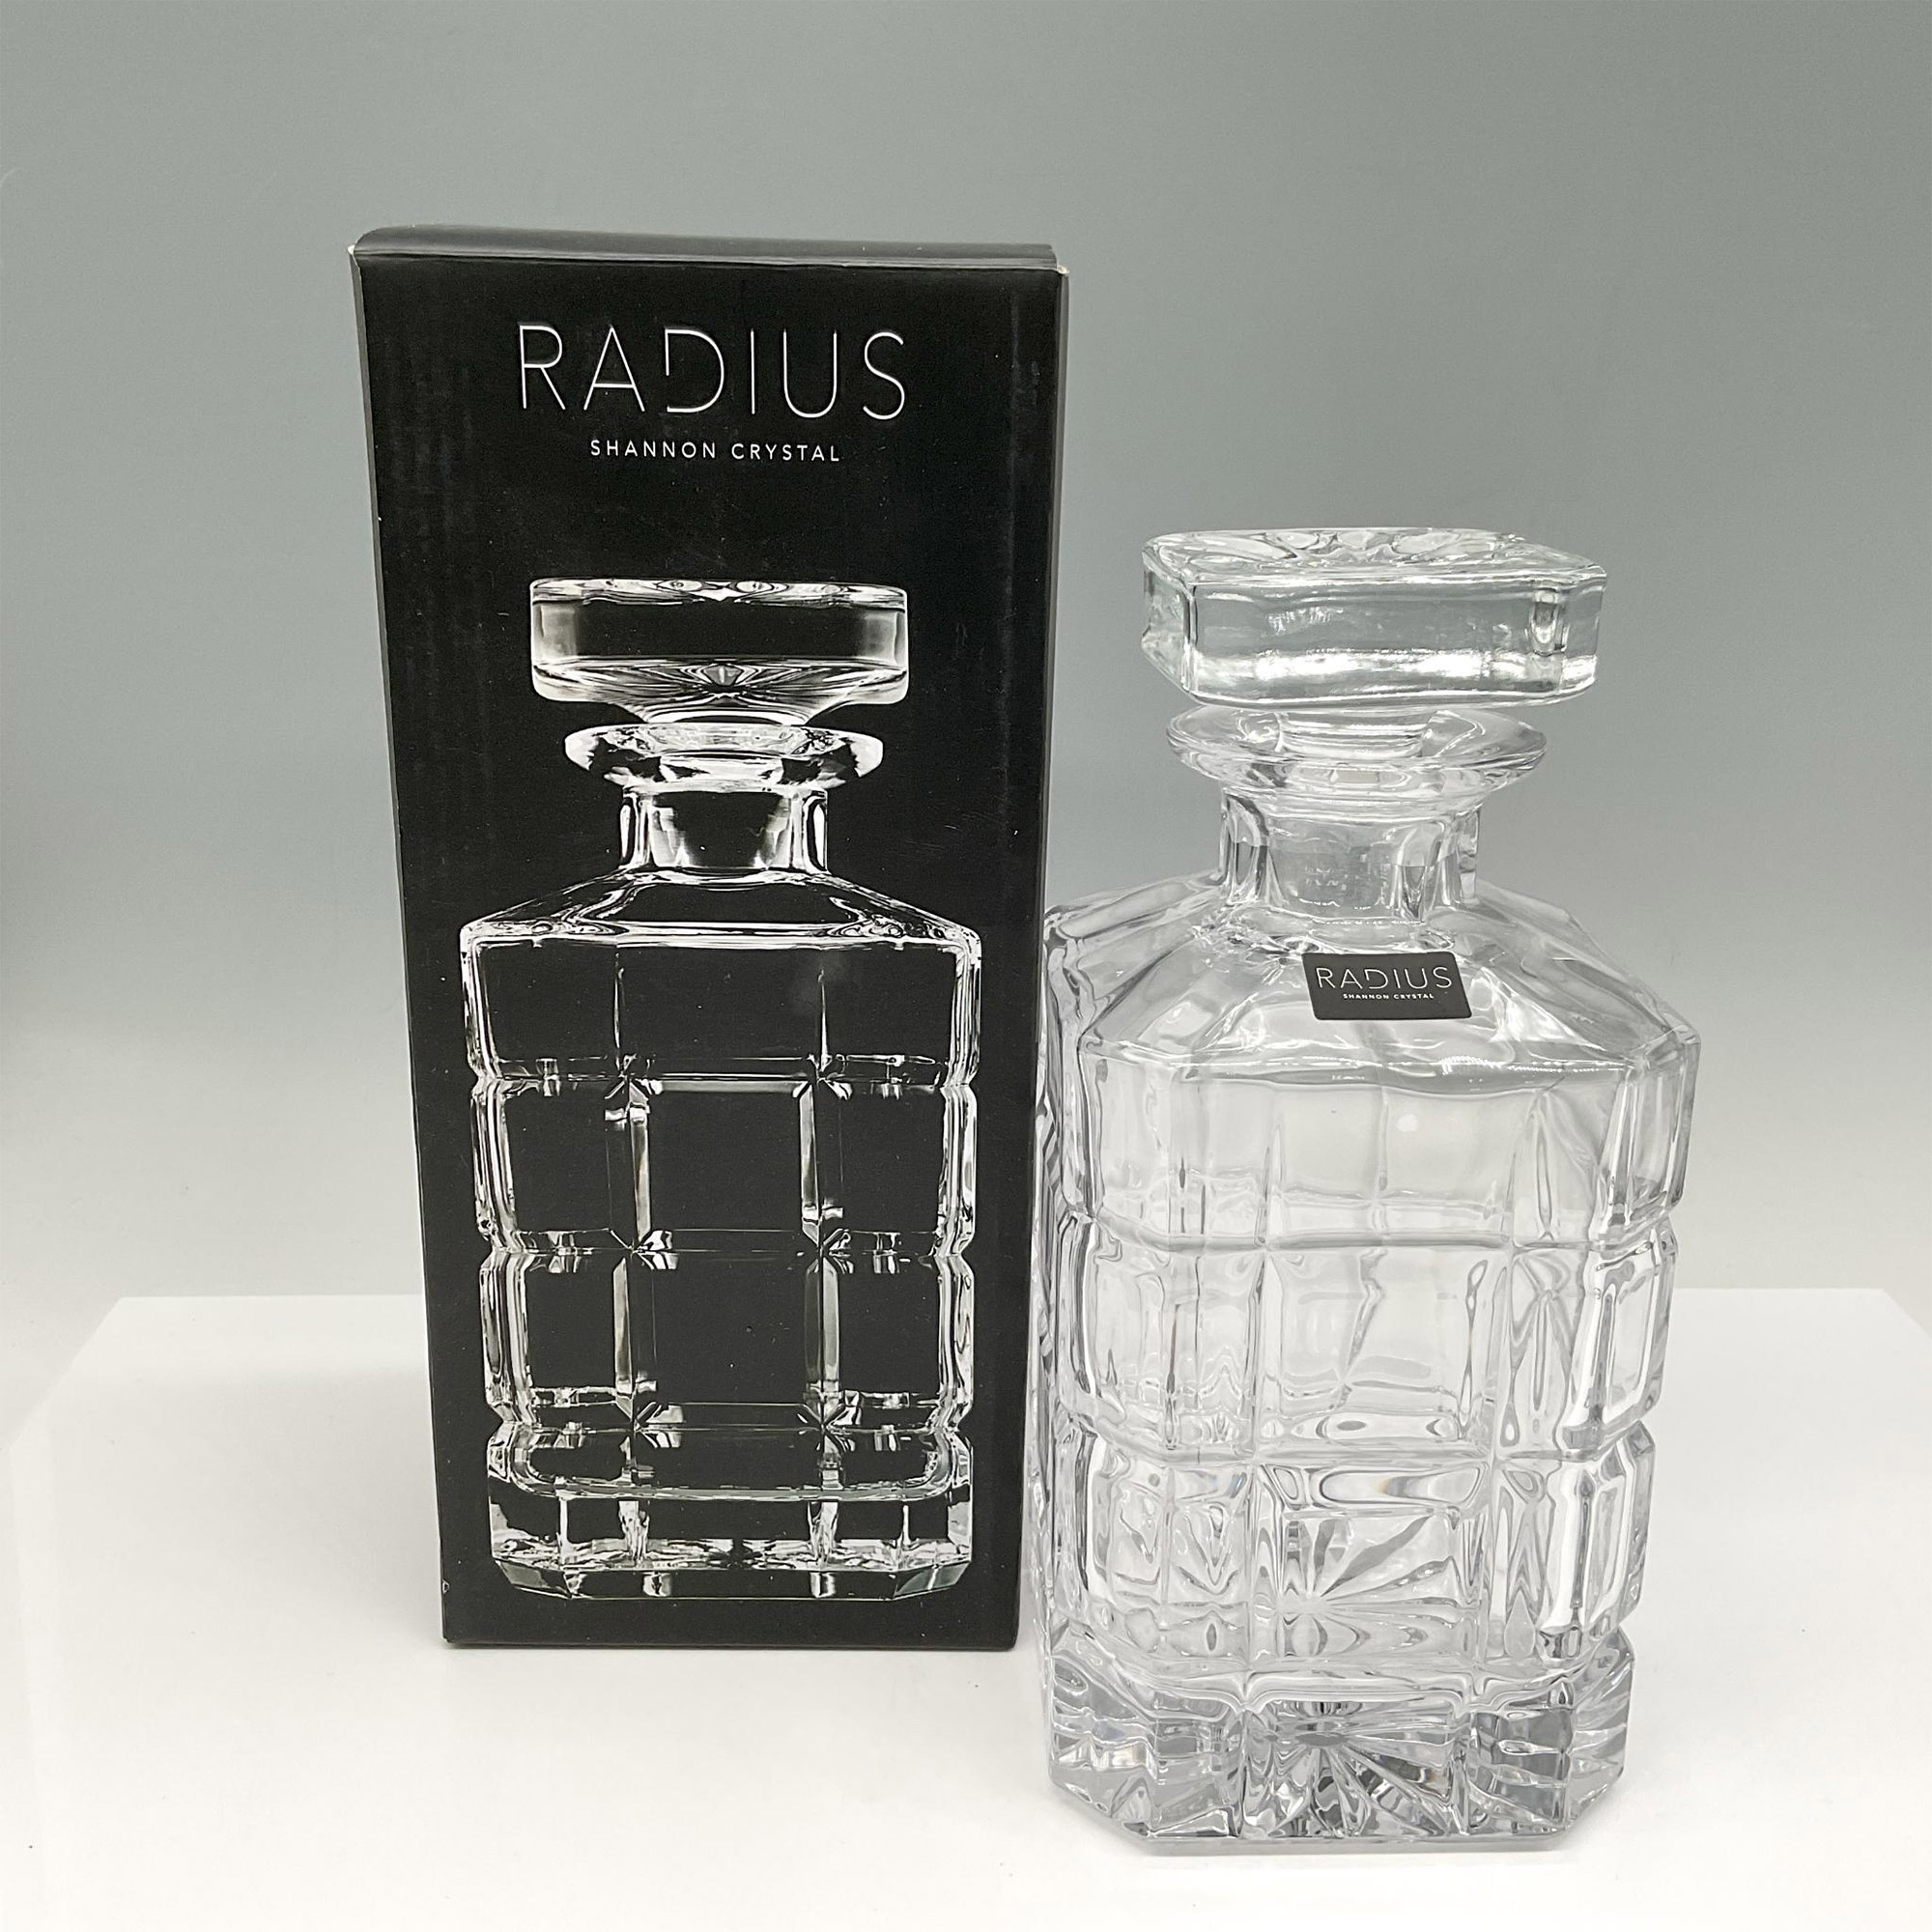 Shannon Crystal Whiskey Decanter & Stopper, Radius - Image 4 of 4